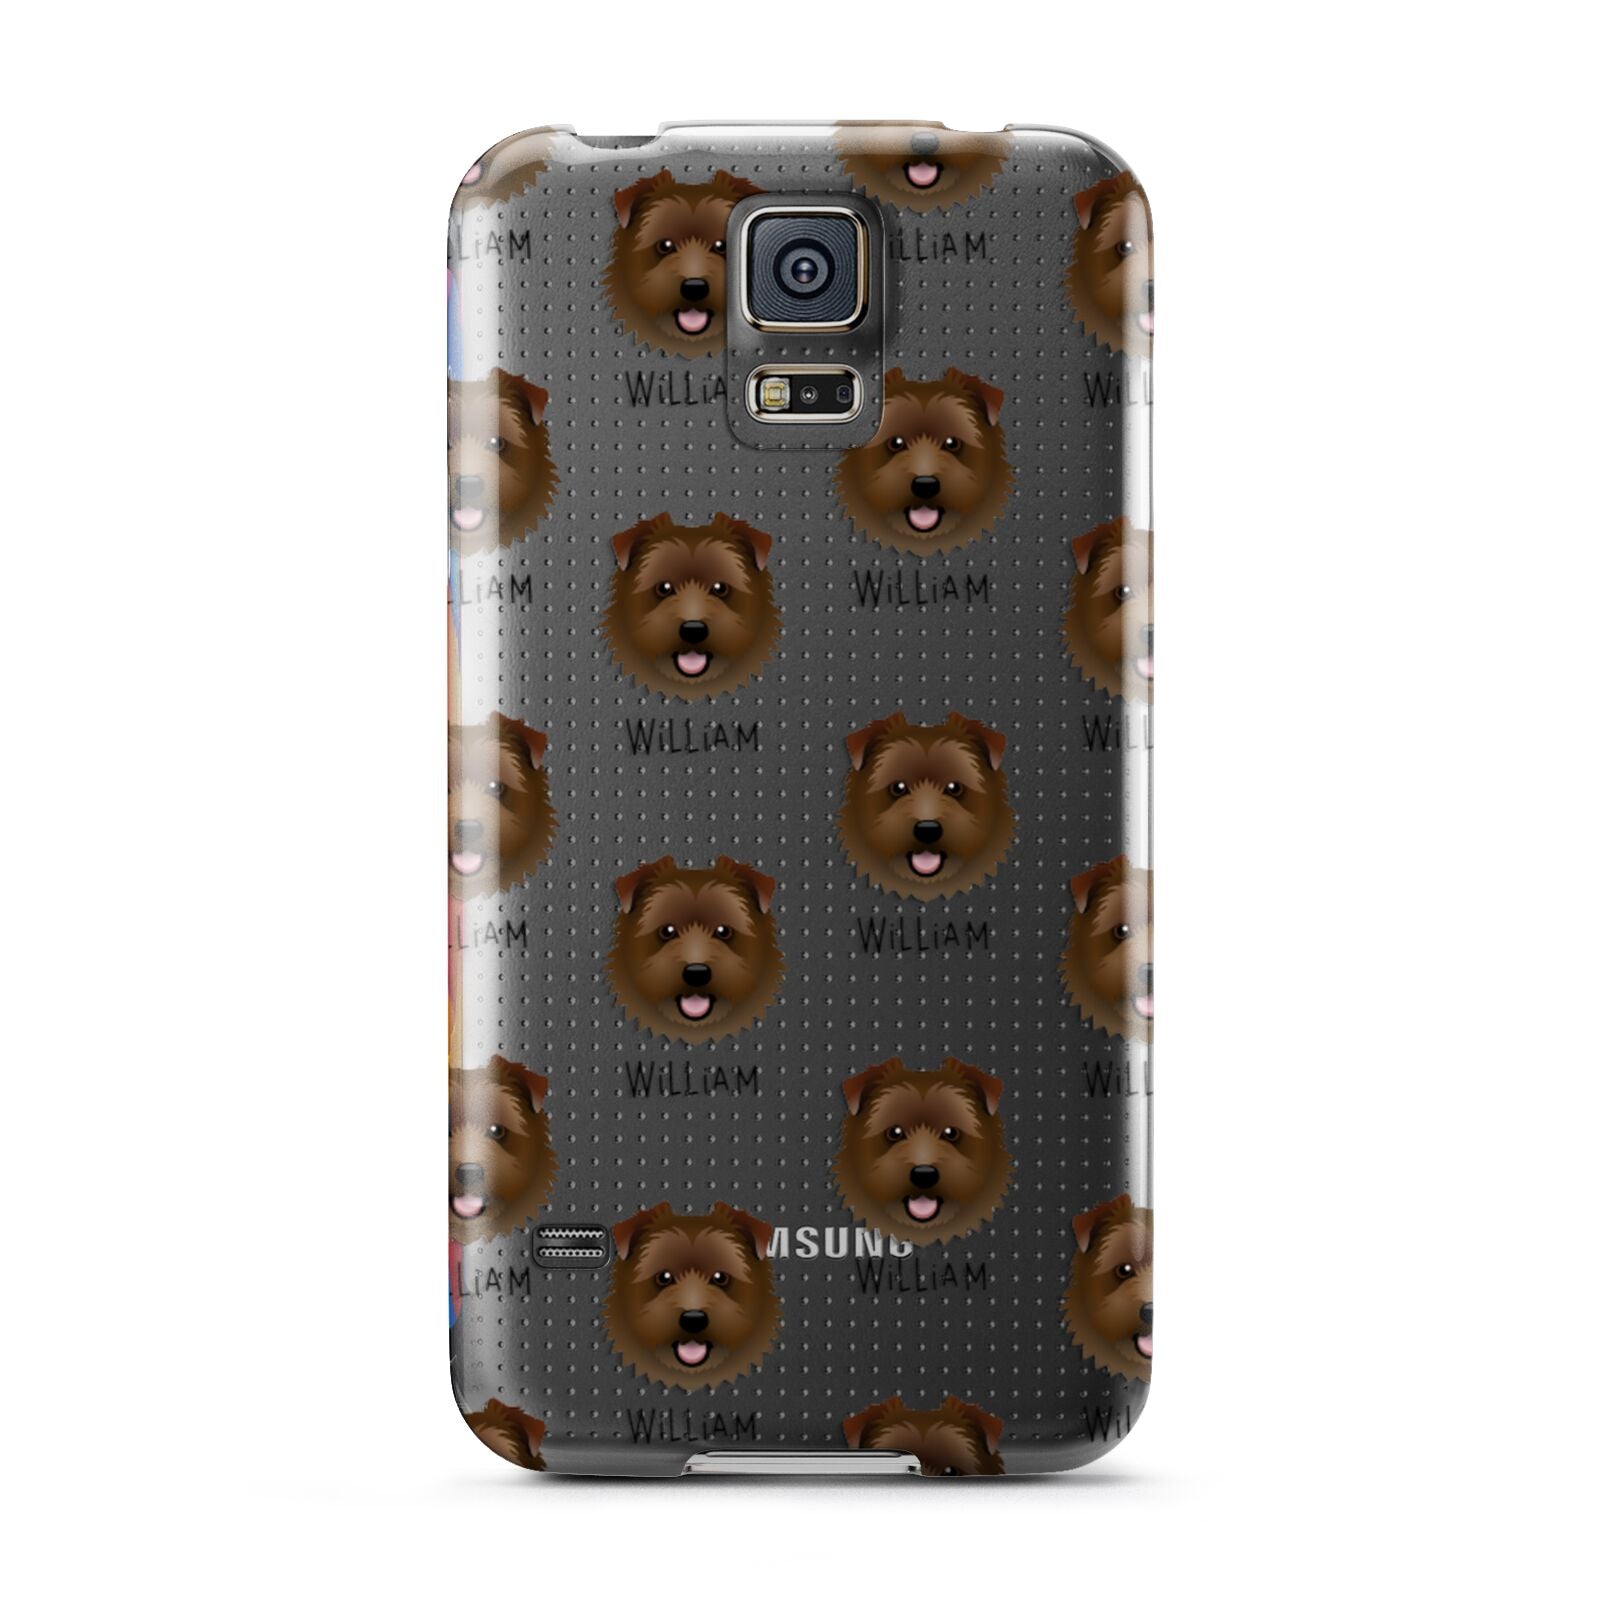 Norfolk Terrier Icon with Name Samsung Galaxy S5 Case